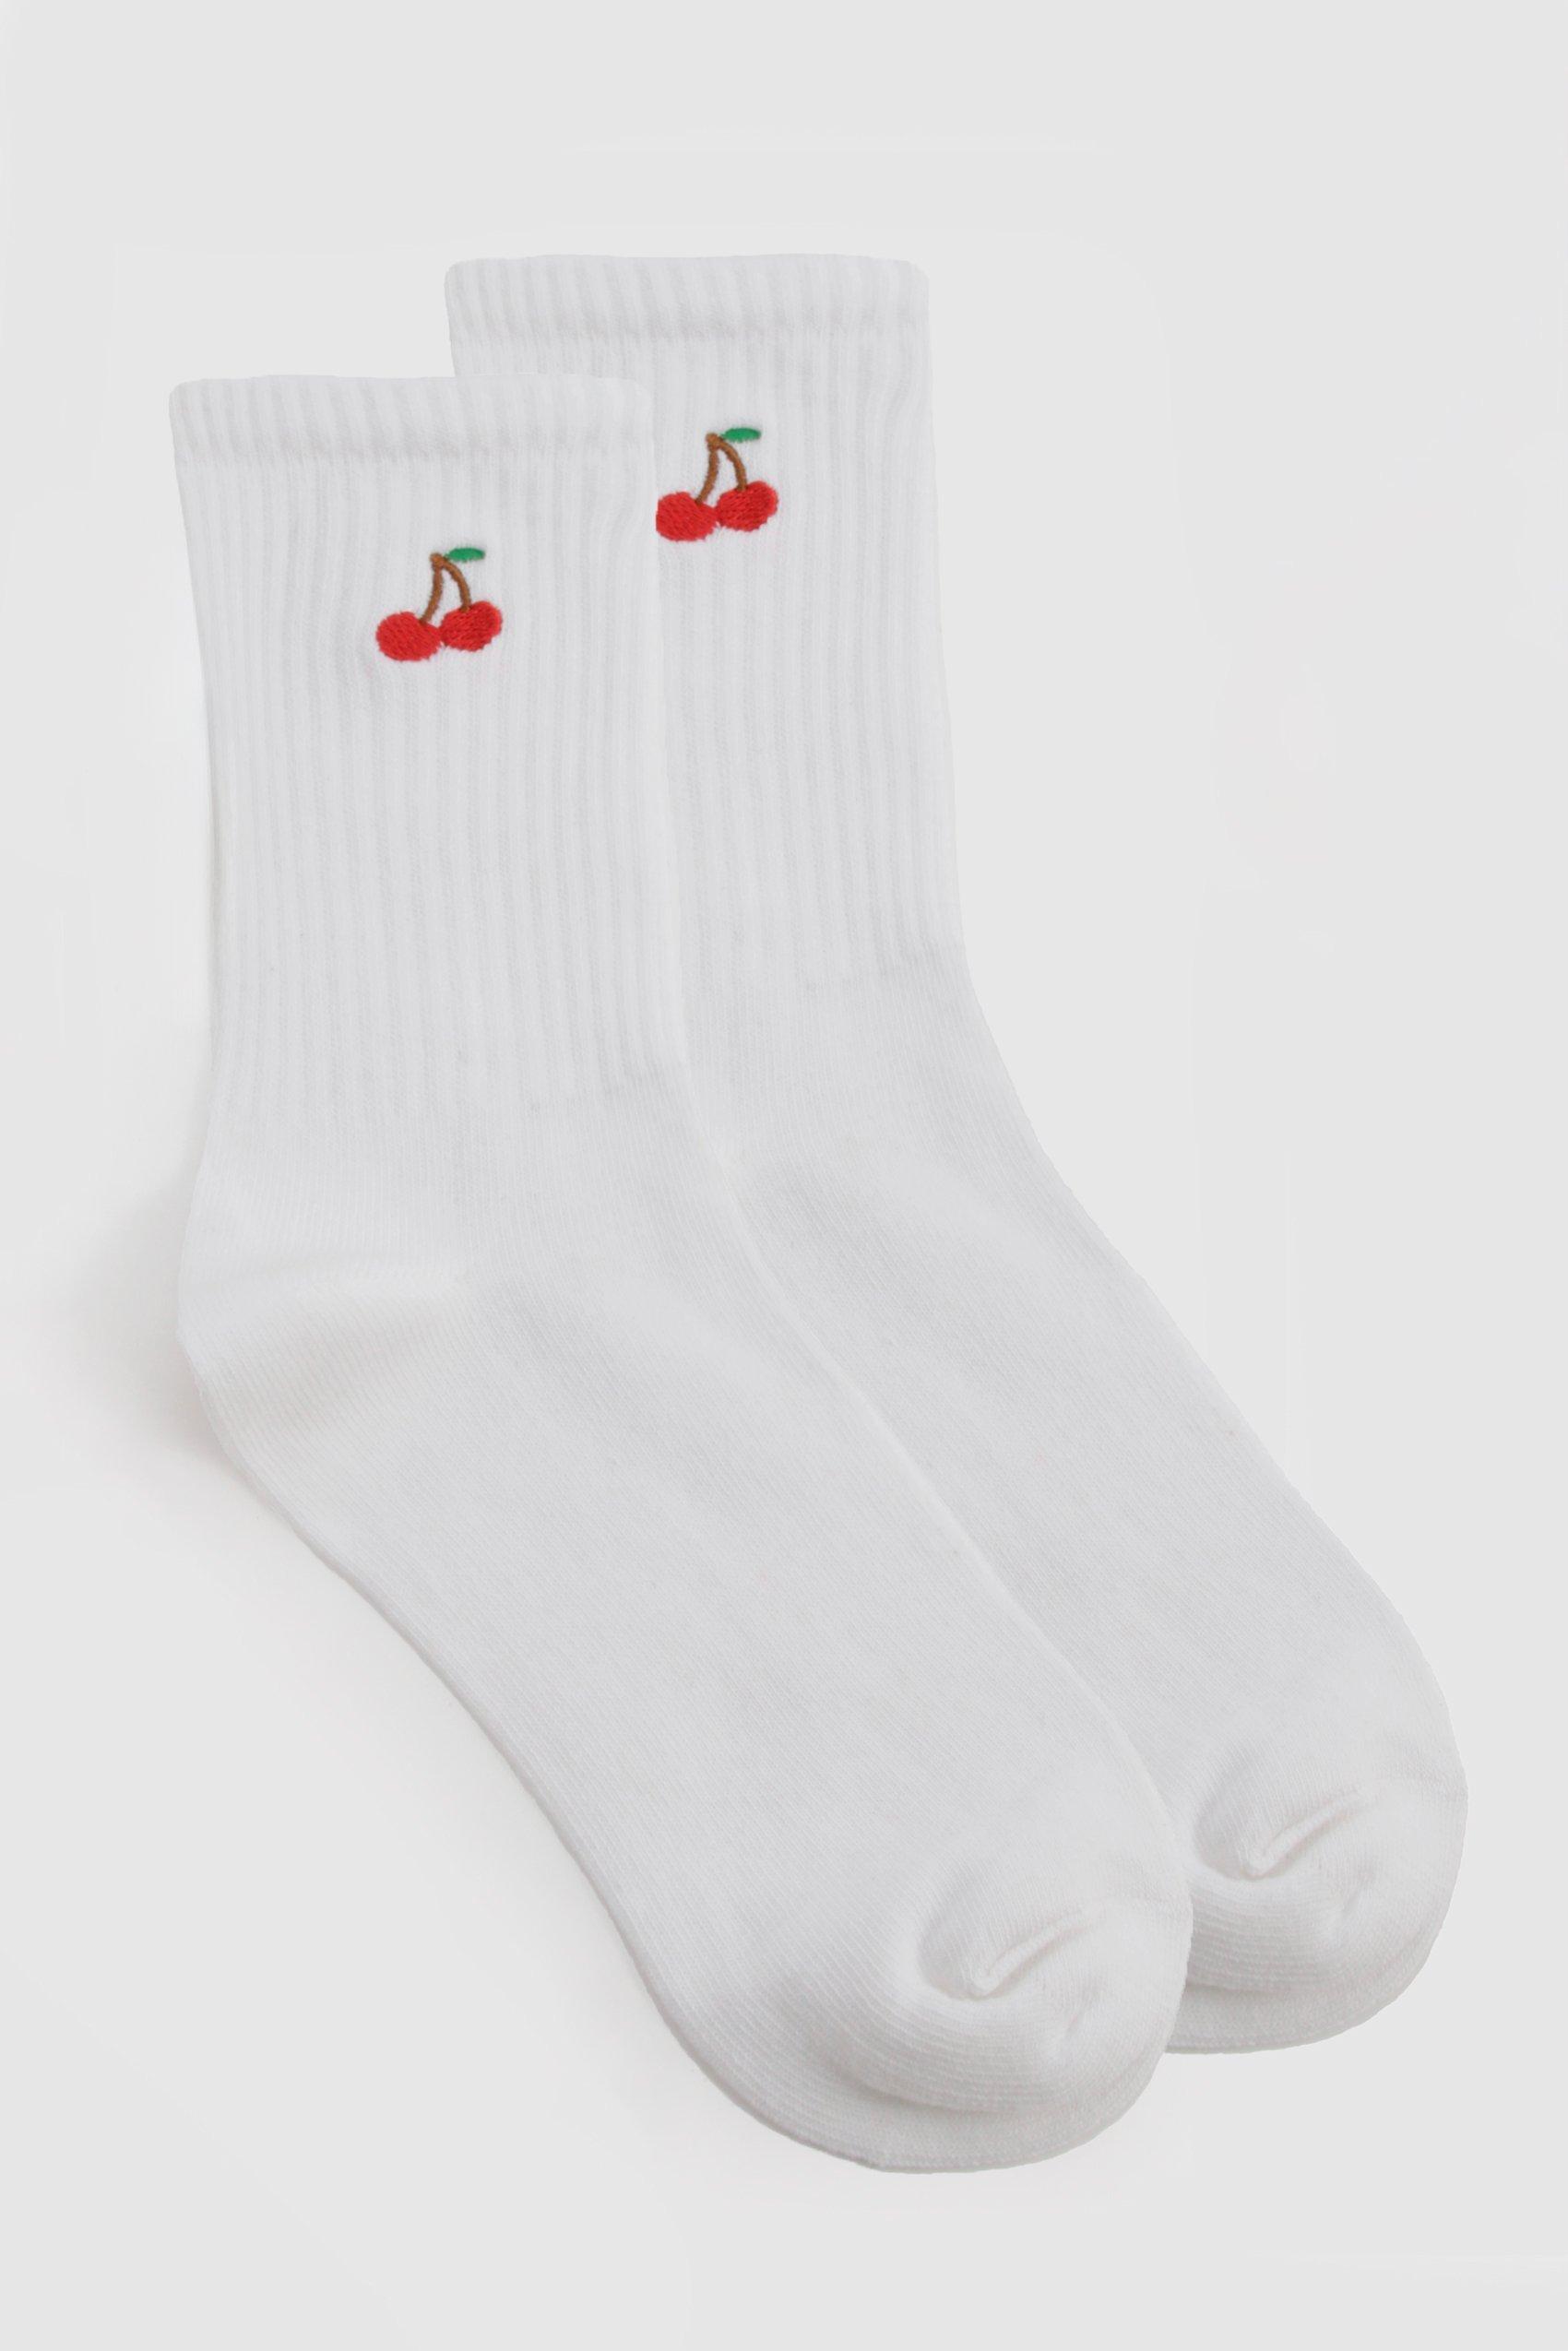 Image of Embroidered Cherry Socks, Bianco